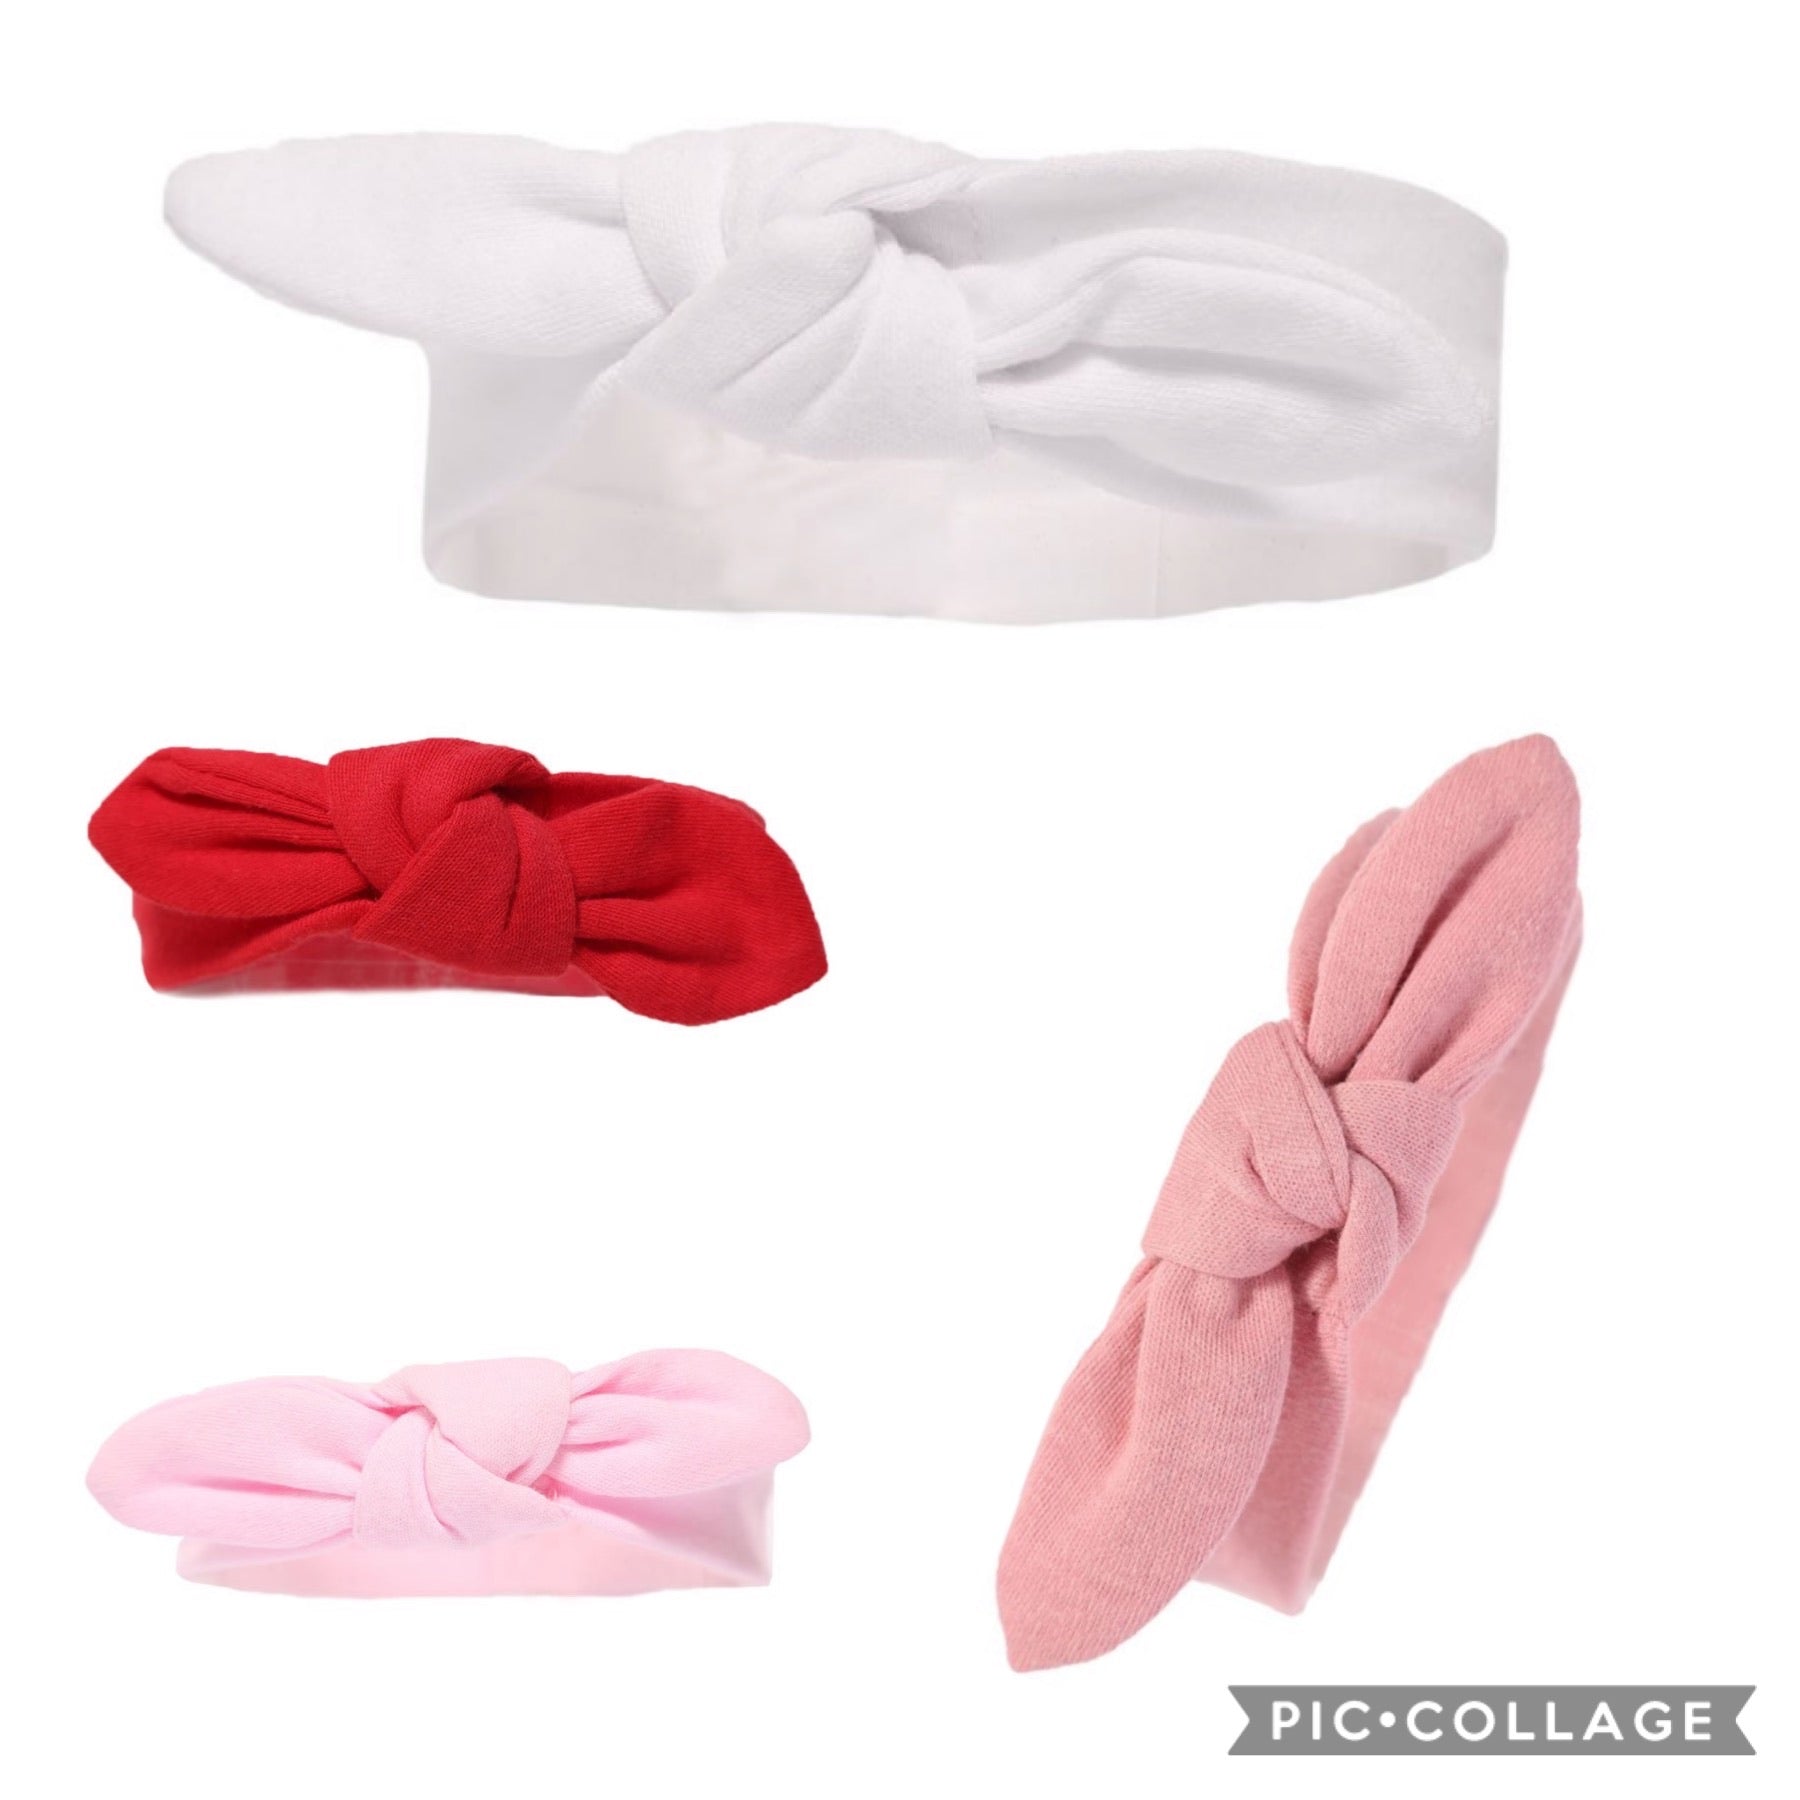 Single Knot Headbands - Pink, Rose Pink, White & Red - Hetty's Baby Boutique